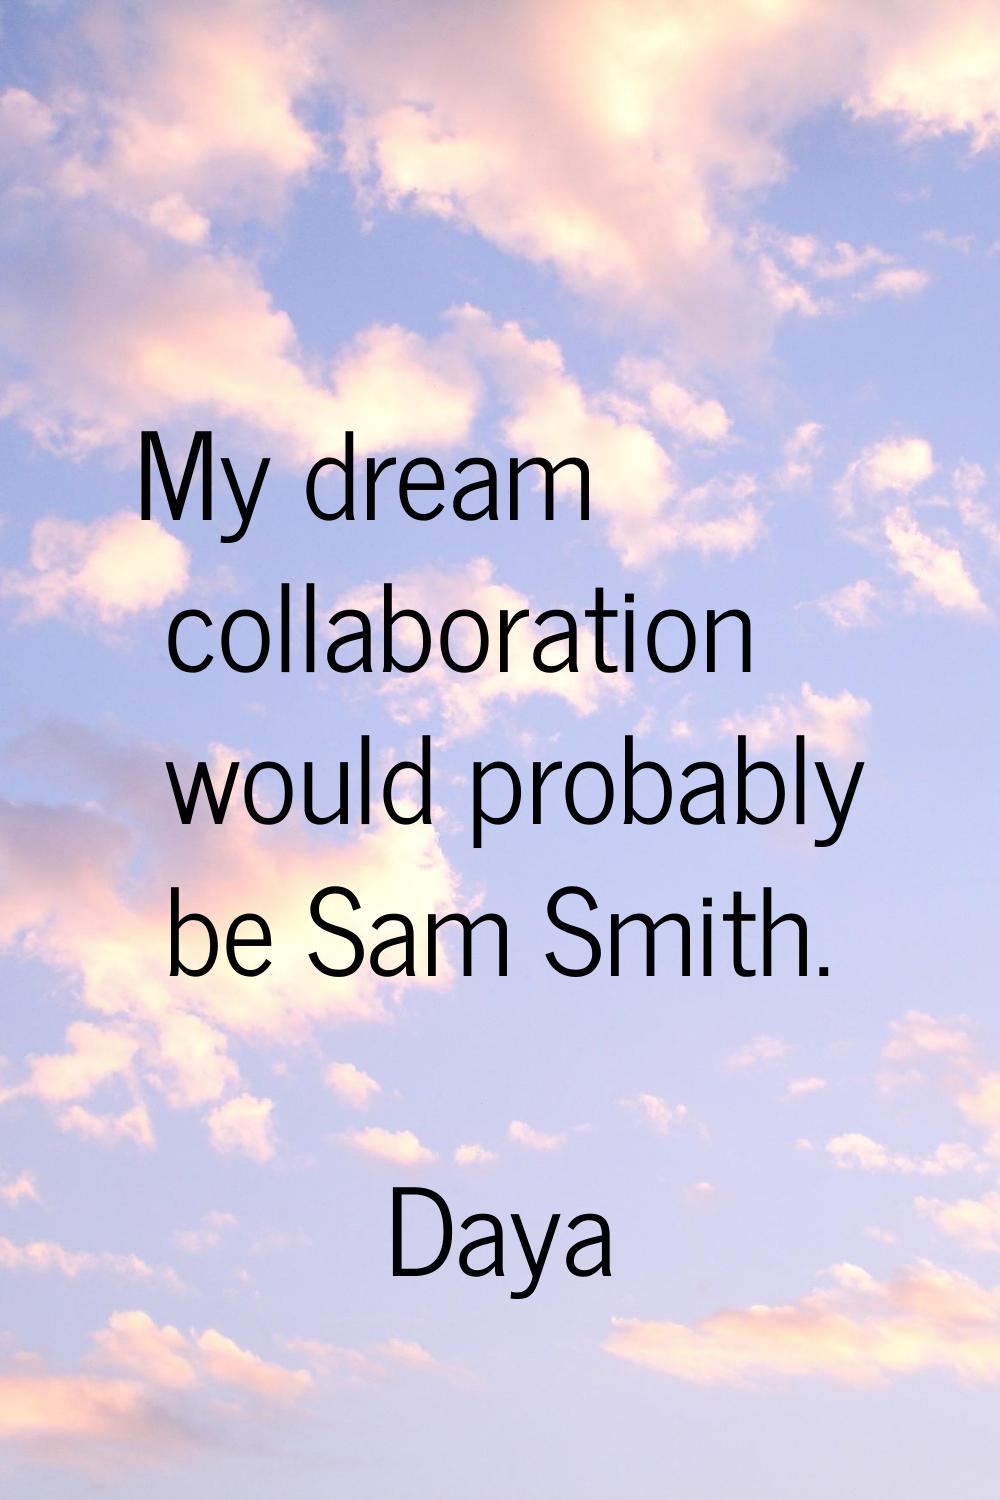 My dream collaboration would probably be Sam Smith.